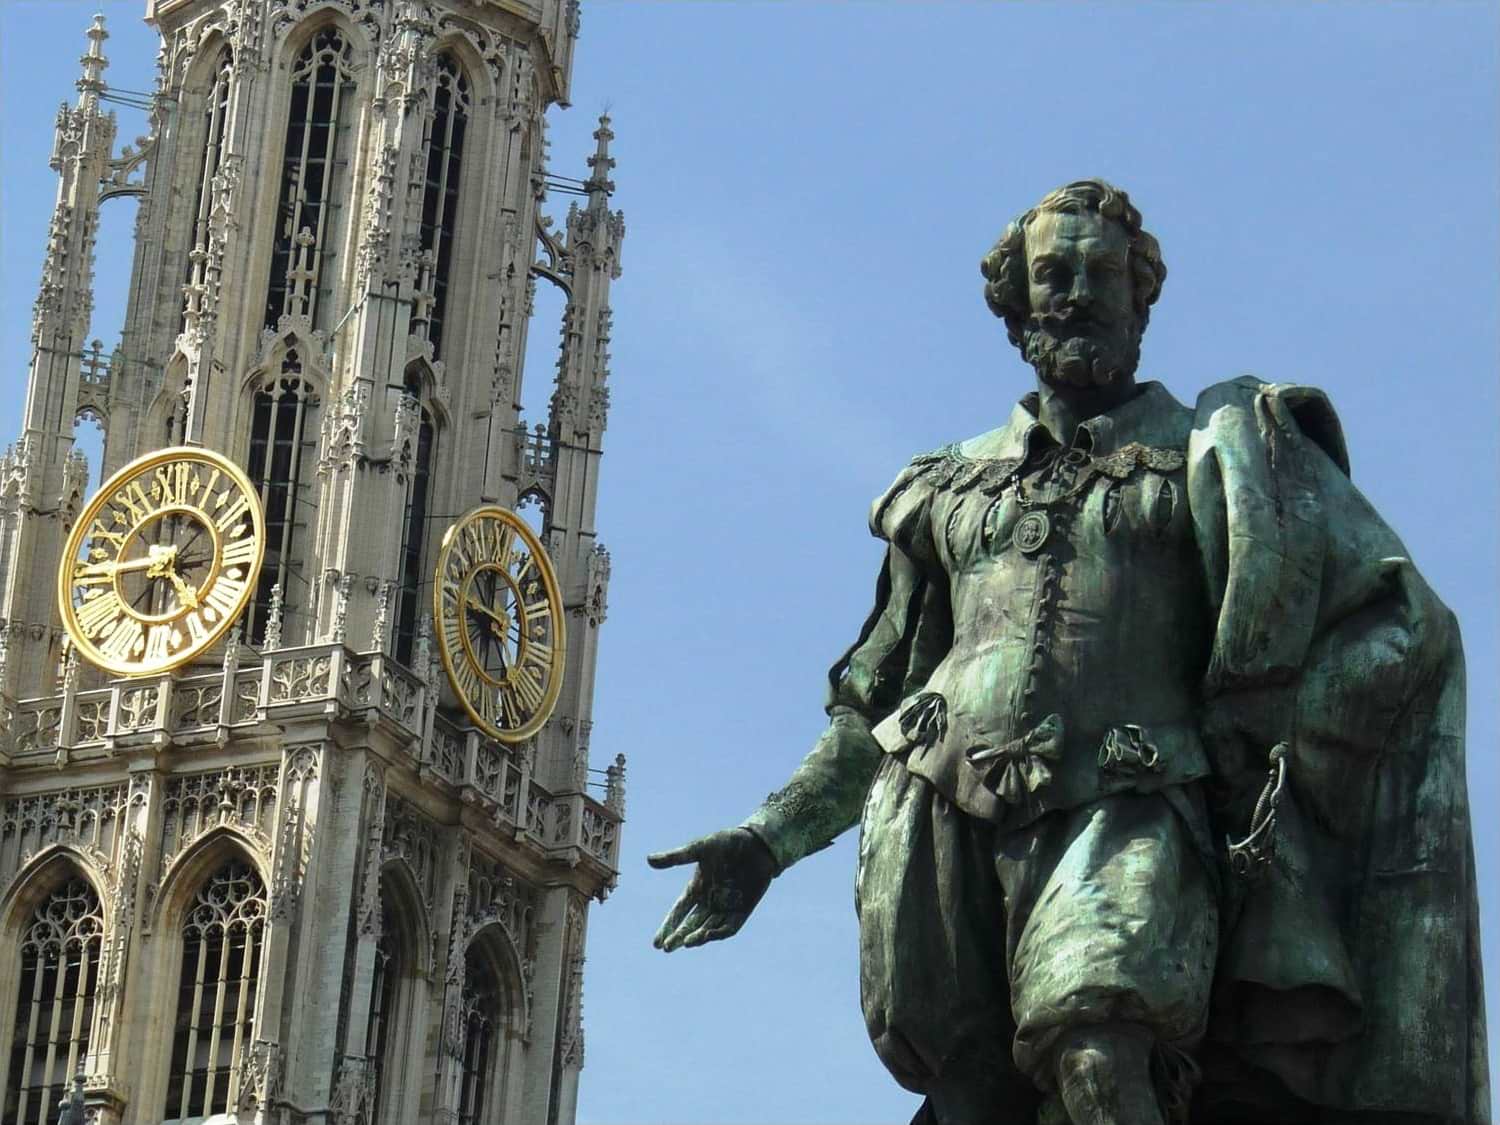 Antwerp and its cathedral welcome you